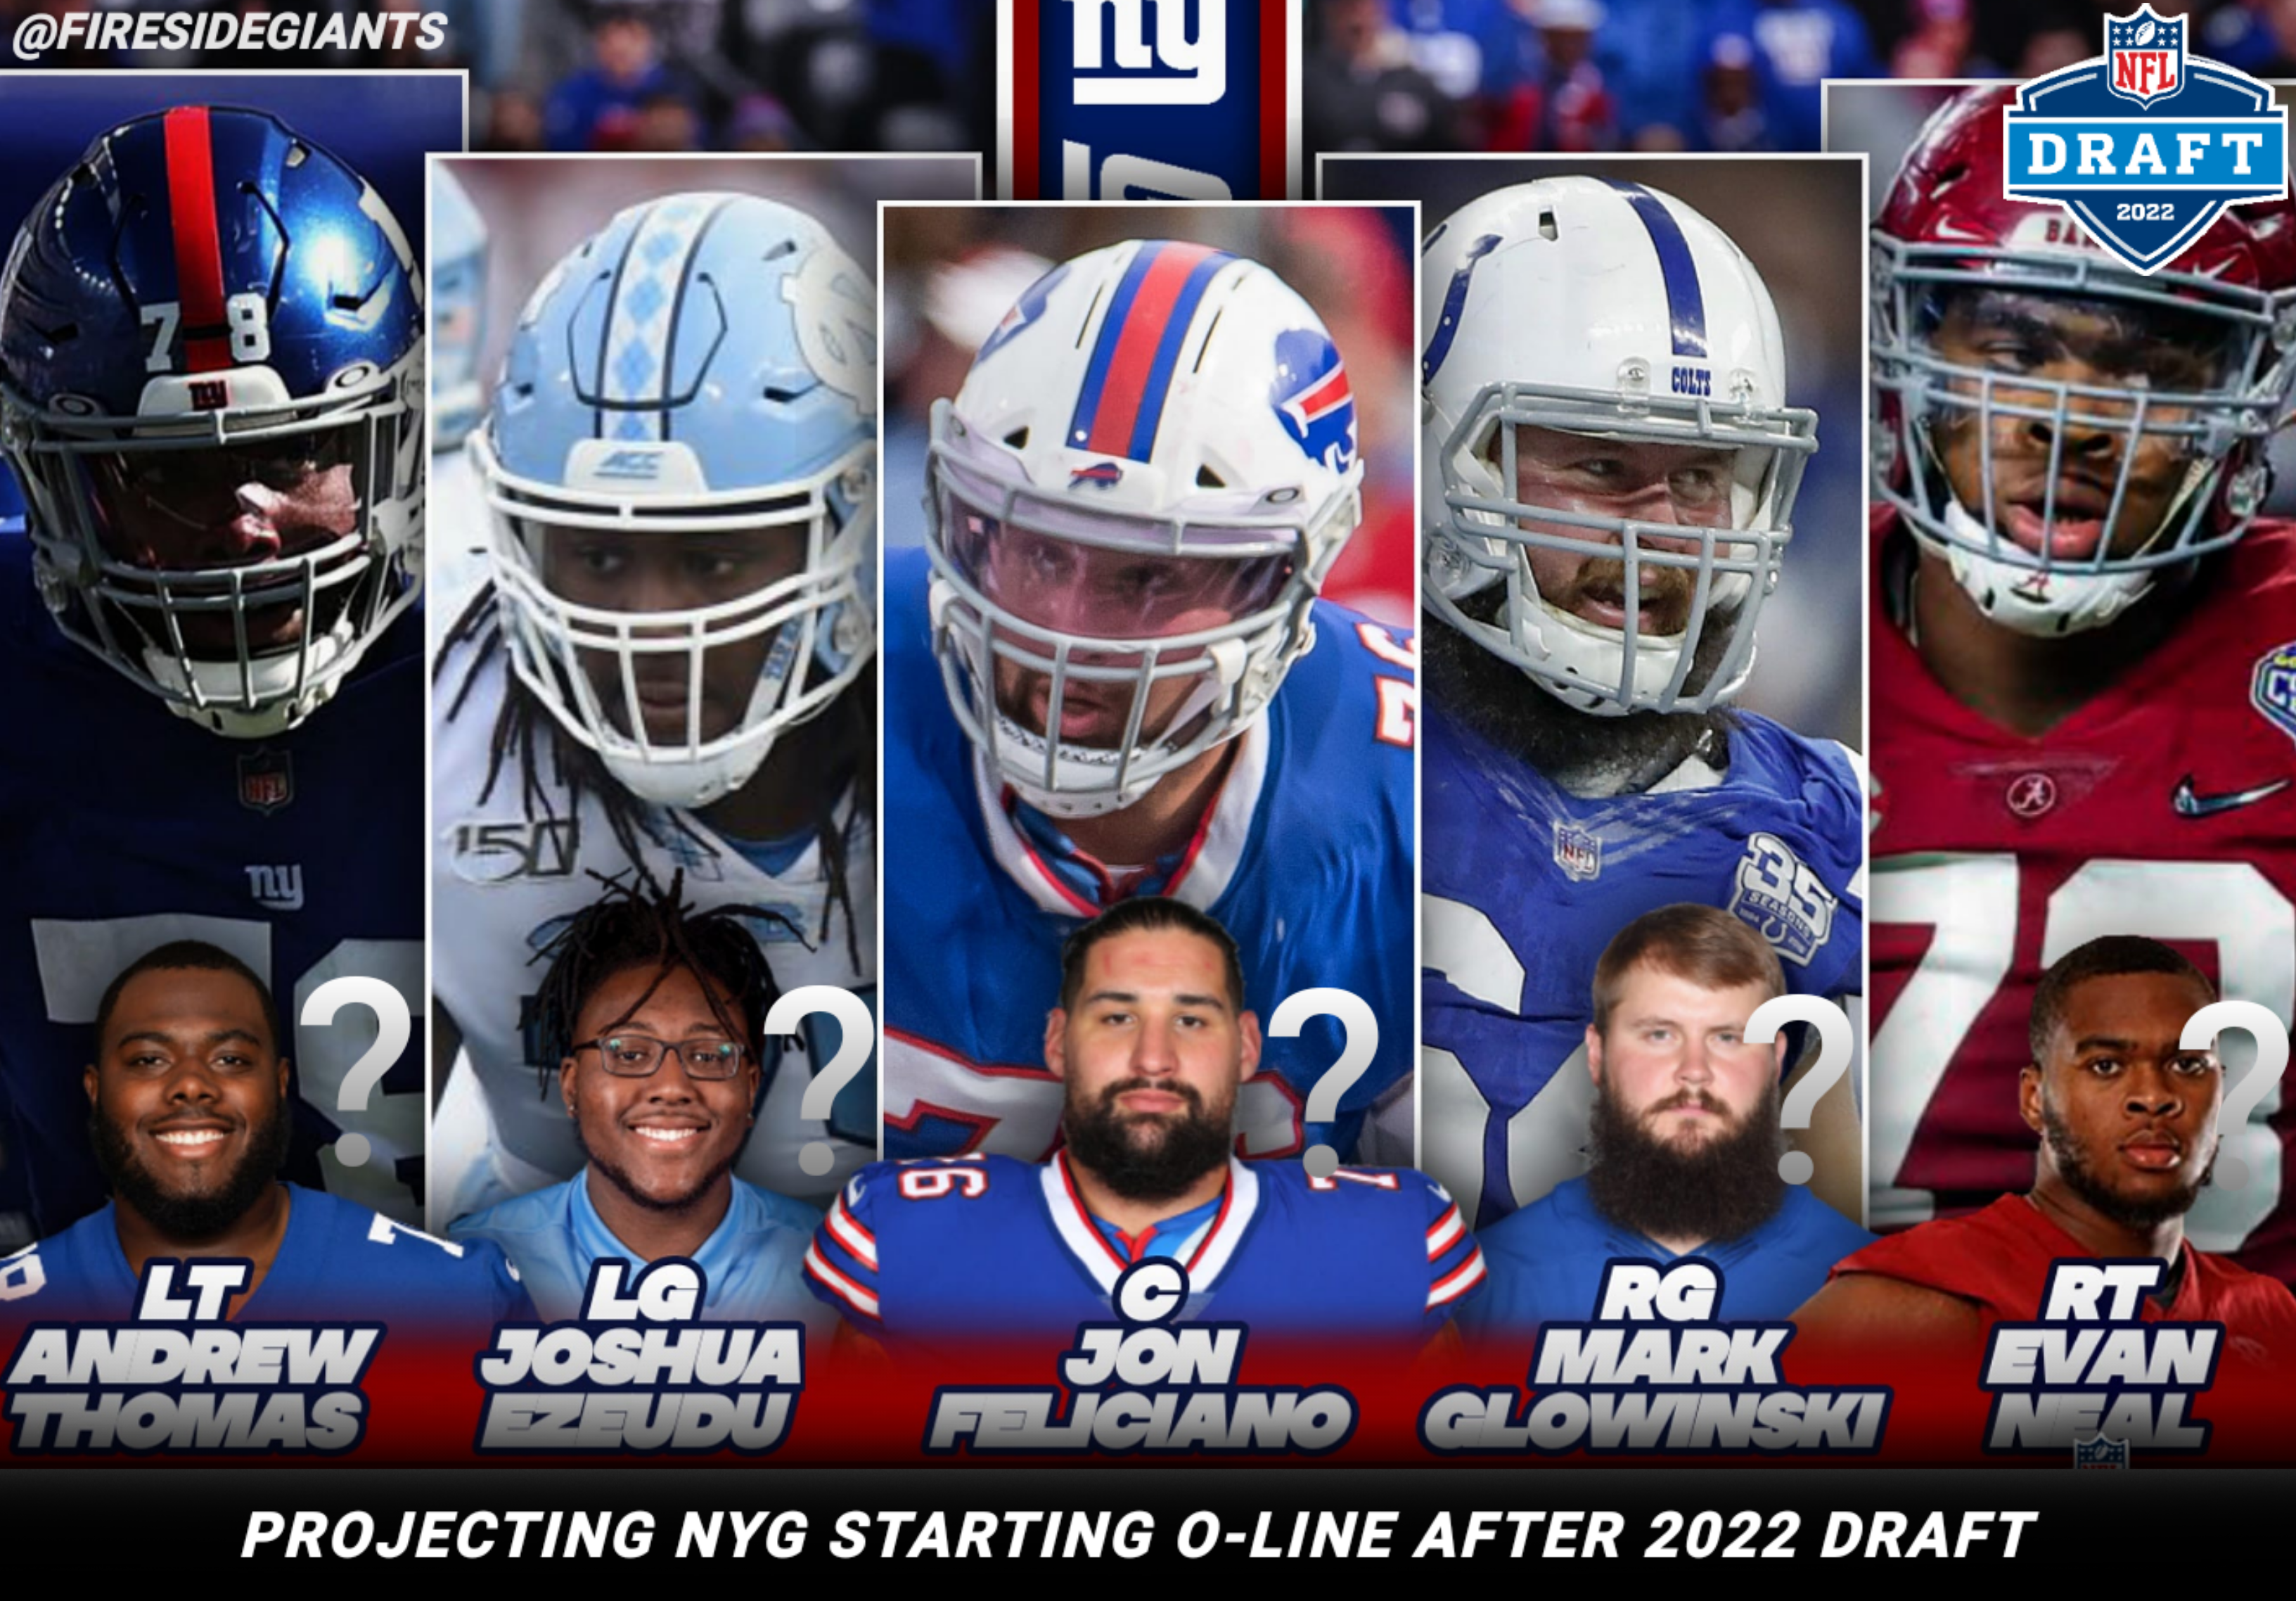 Projecting the Giants’ starting 2022 offensive line after the NFL Draft